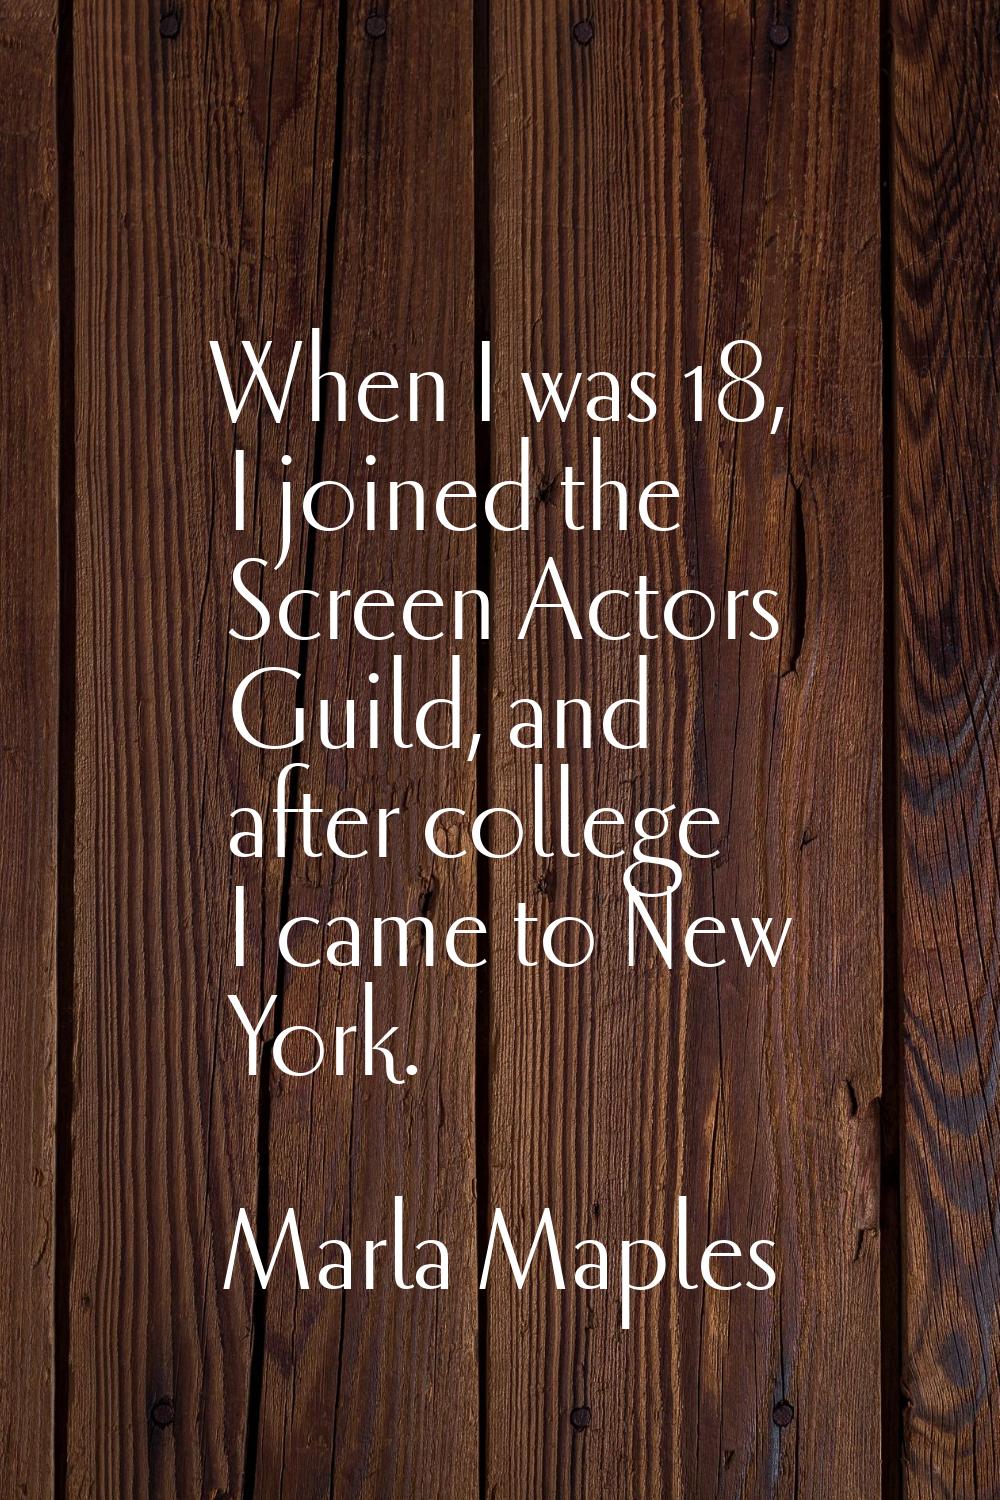 When I was 18, I joined the Screen Actors Guild, and after college I came to New York.